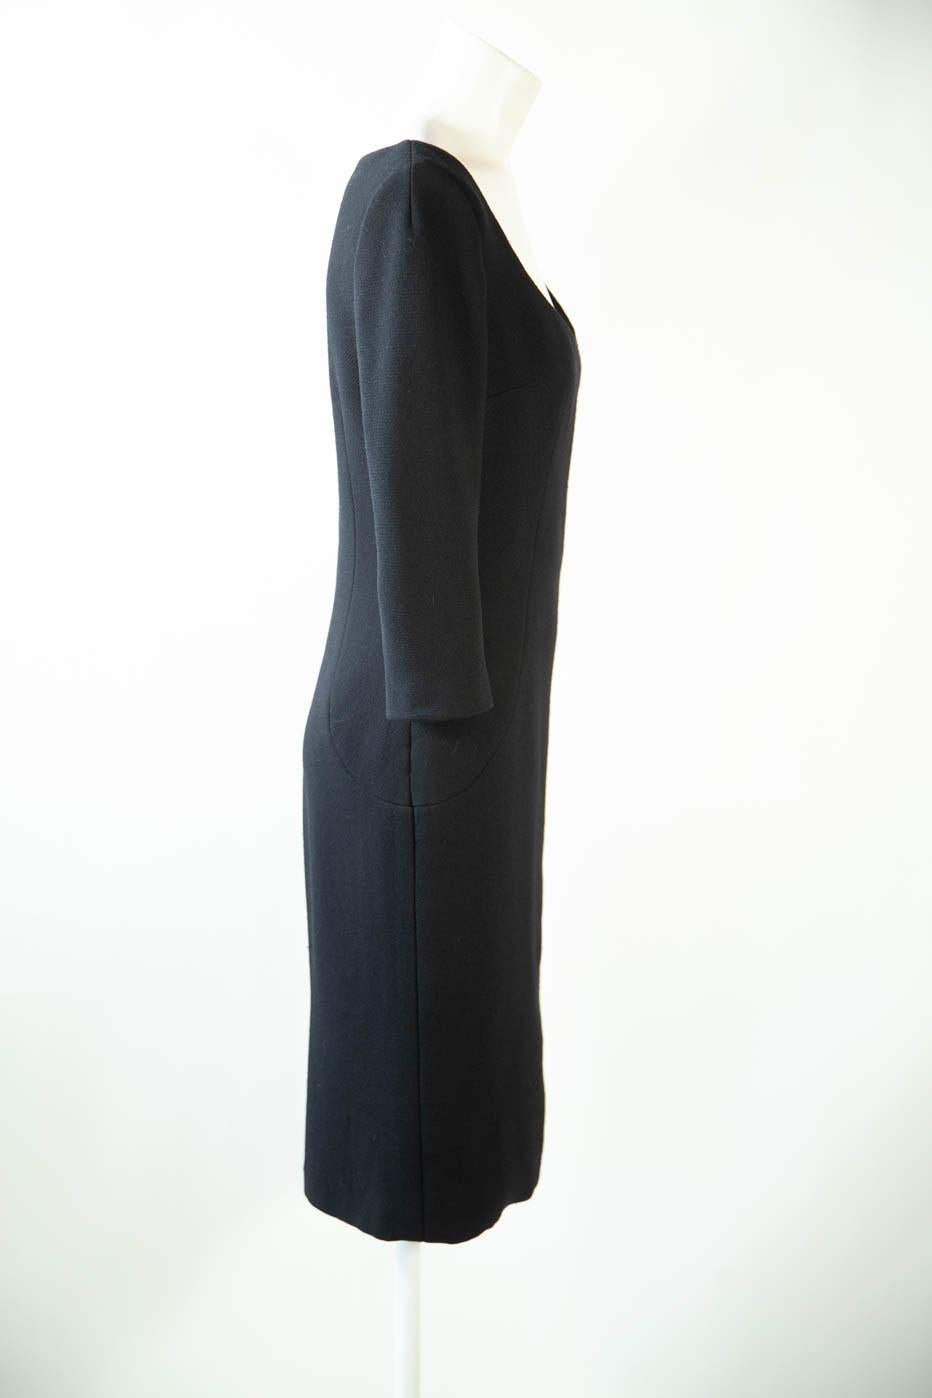 Dolce and Gabbana black dress with 3/4 sleeve and scoop neck, knee length. 

Sz 42 / US Sz 6